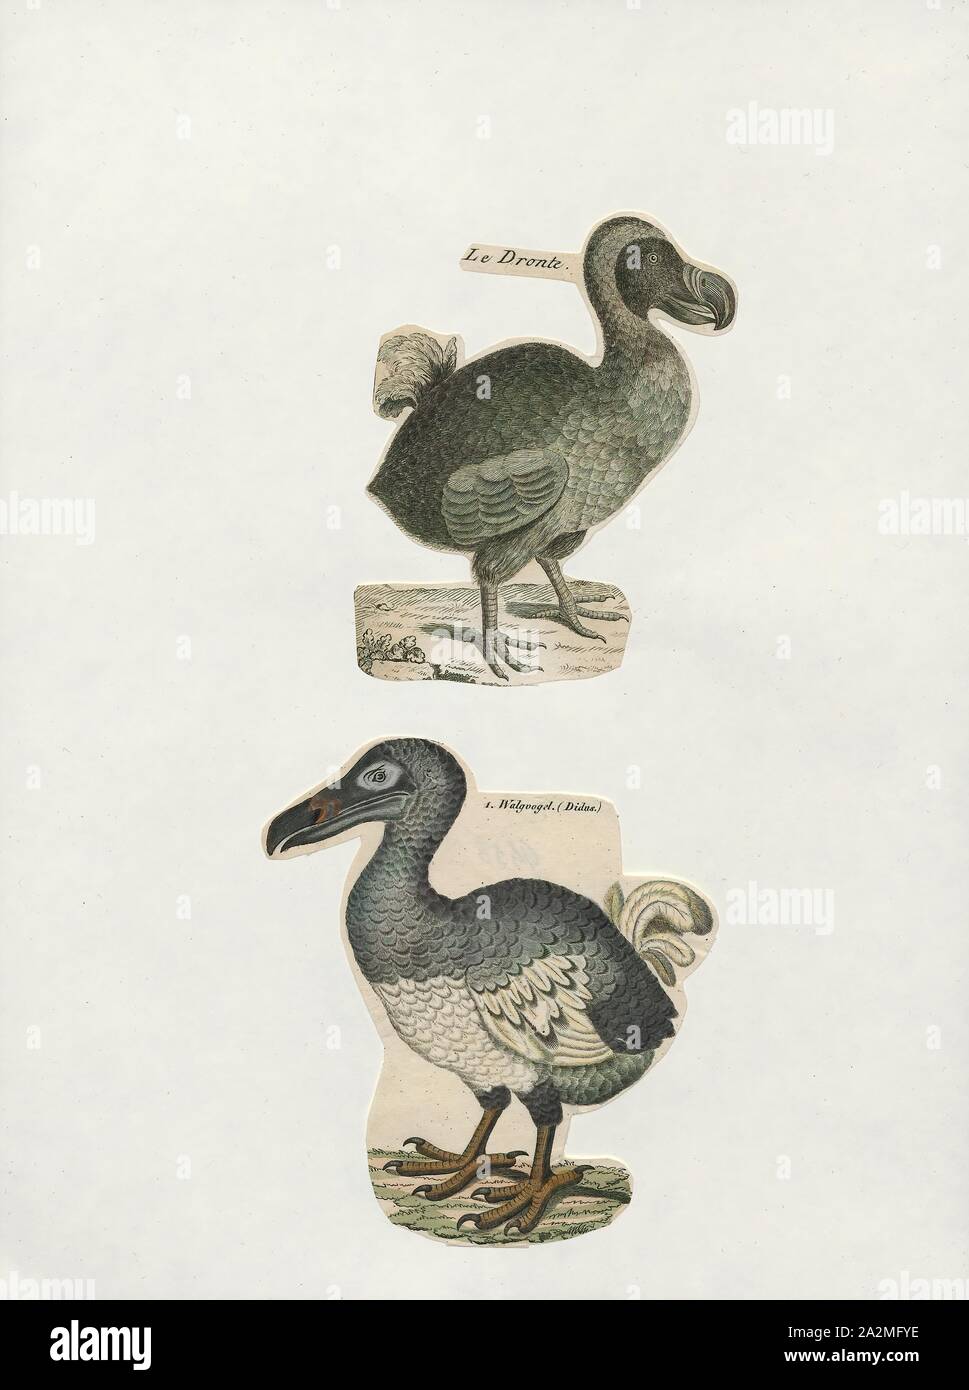 Didus ineptus, Print, The dodo (Raphus cucullatus) is an extinct flightless bird that was endemic to the island of Mauritius, east of Madagascar in the Indian Ocean. The dodo's closest genetic relative was the also-extinct Rodrigues solitaire, the two forming the subfamily Raphinae of the family of pigeons and doves. The closest living relative of the dodo is the Nicobar pigeon. A white dodo was once thought to have existed on the nearby island of Réunion, but this is now thought to have been confusion based on the Réunion ibis and paintings of white dodos., 1700-1880 Stock Photo